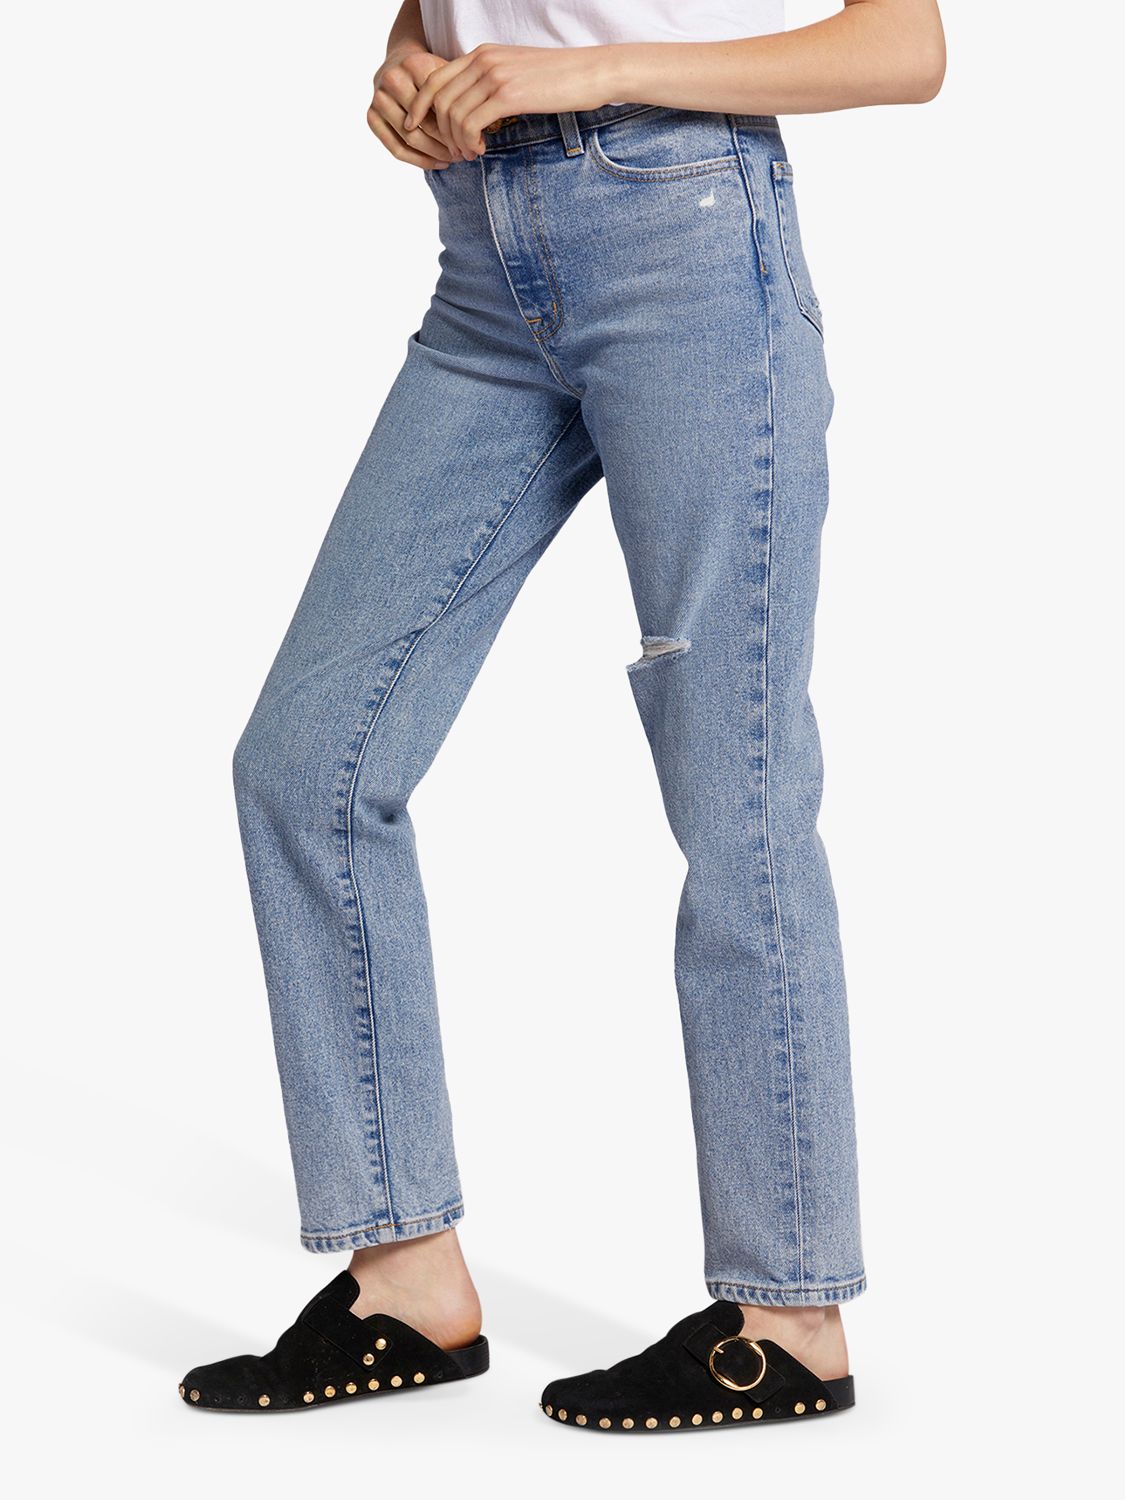 Current/Elliott The Soulmate High Rise Slim Straight Distressed Jeans, Camino Light Blue, W23/L30